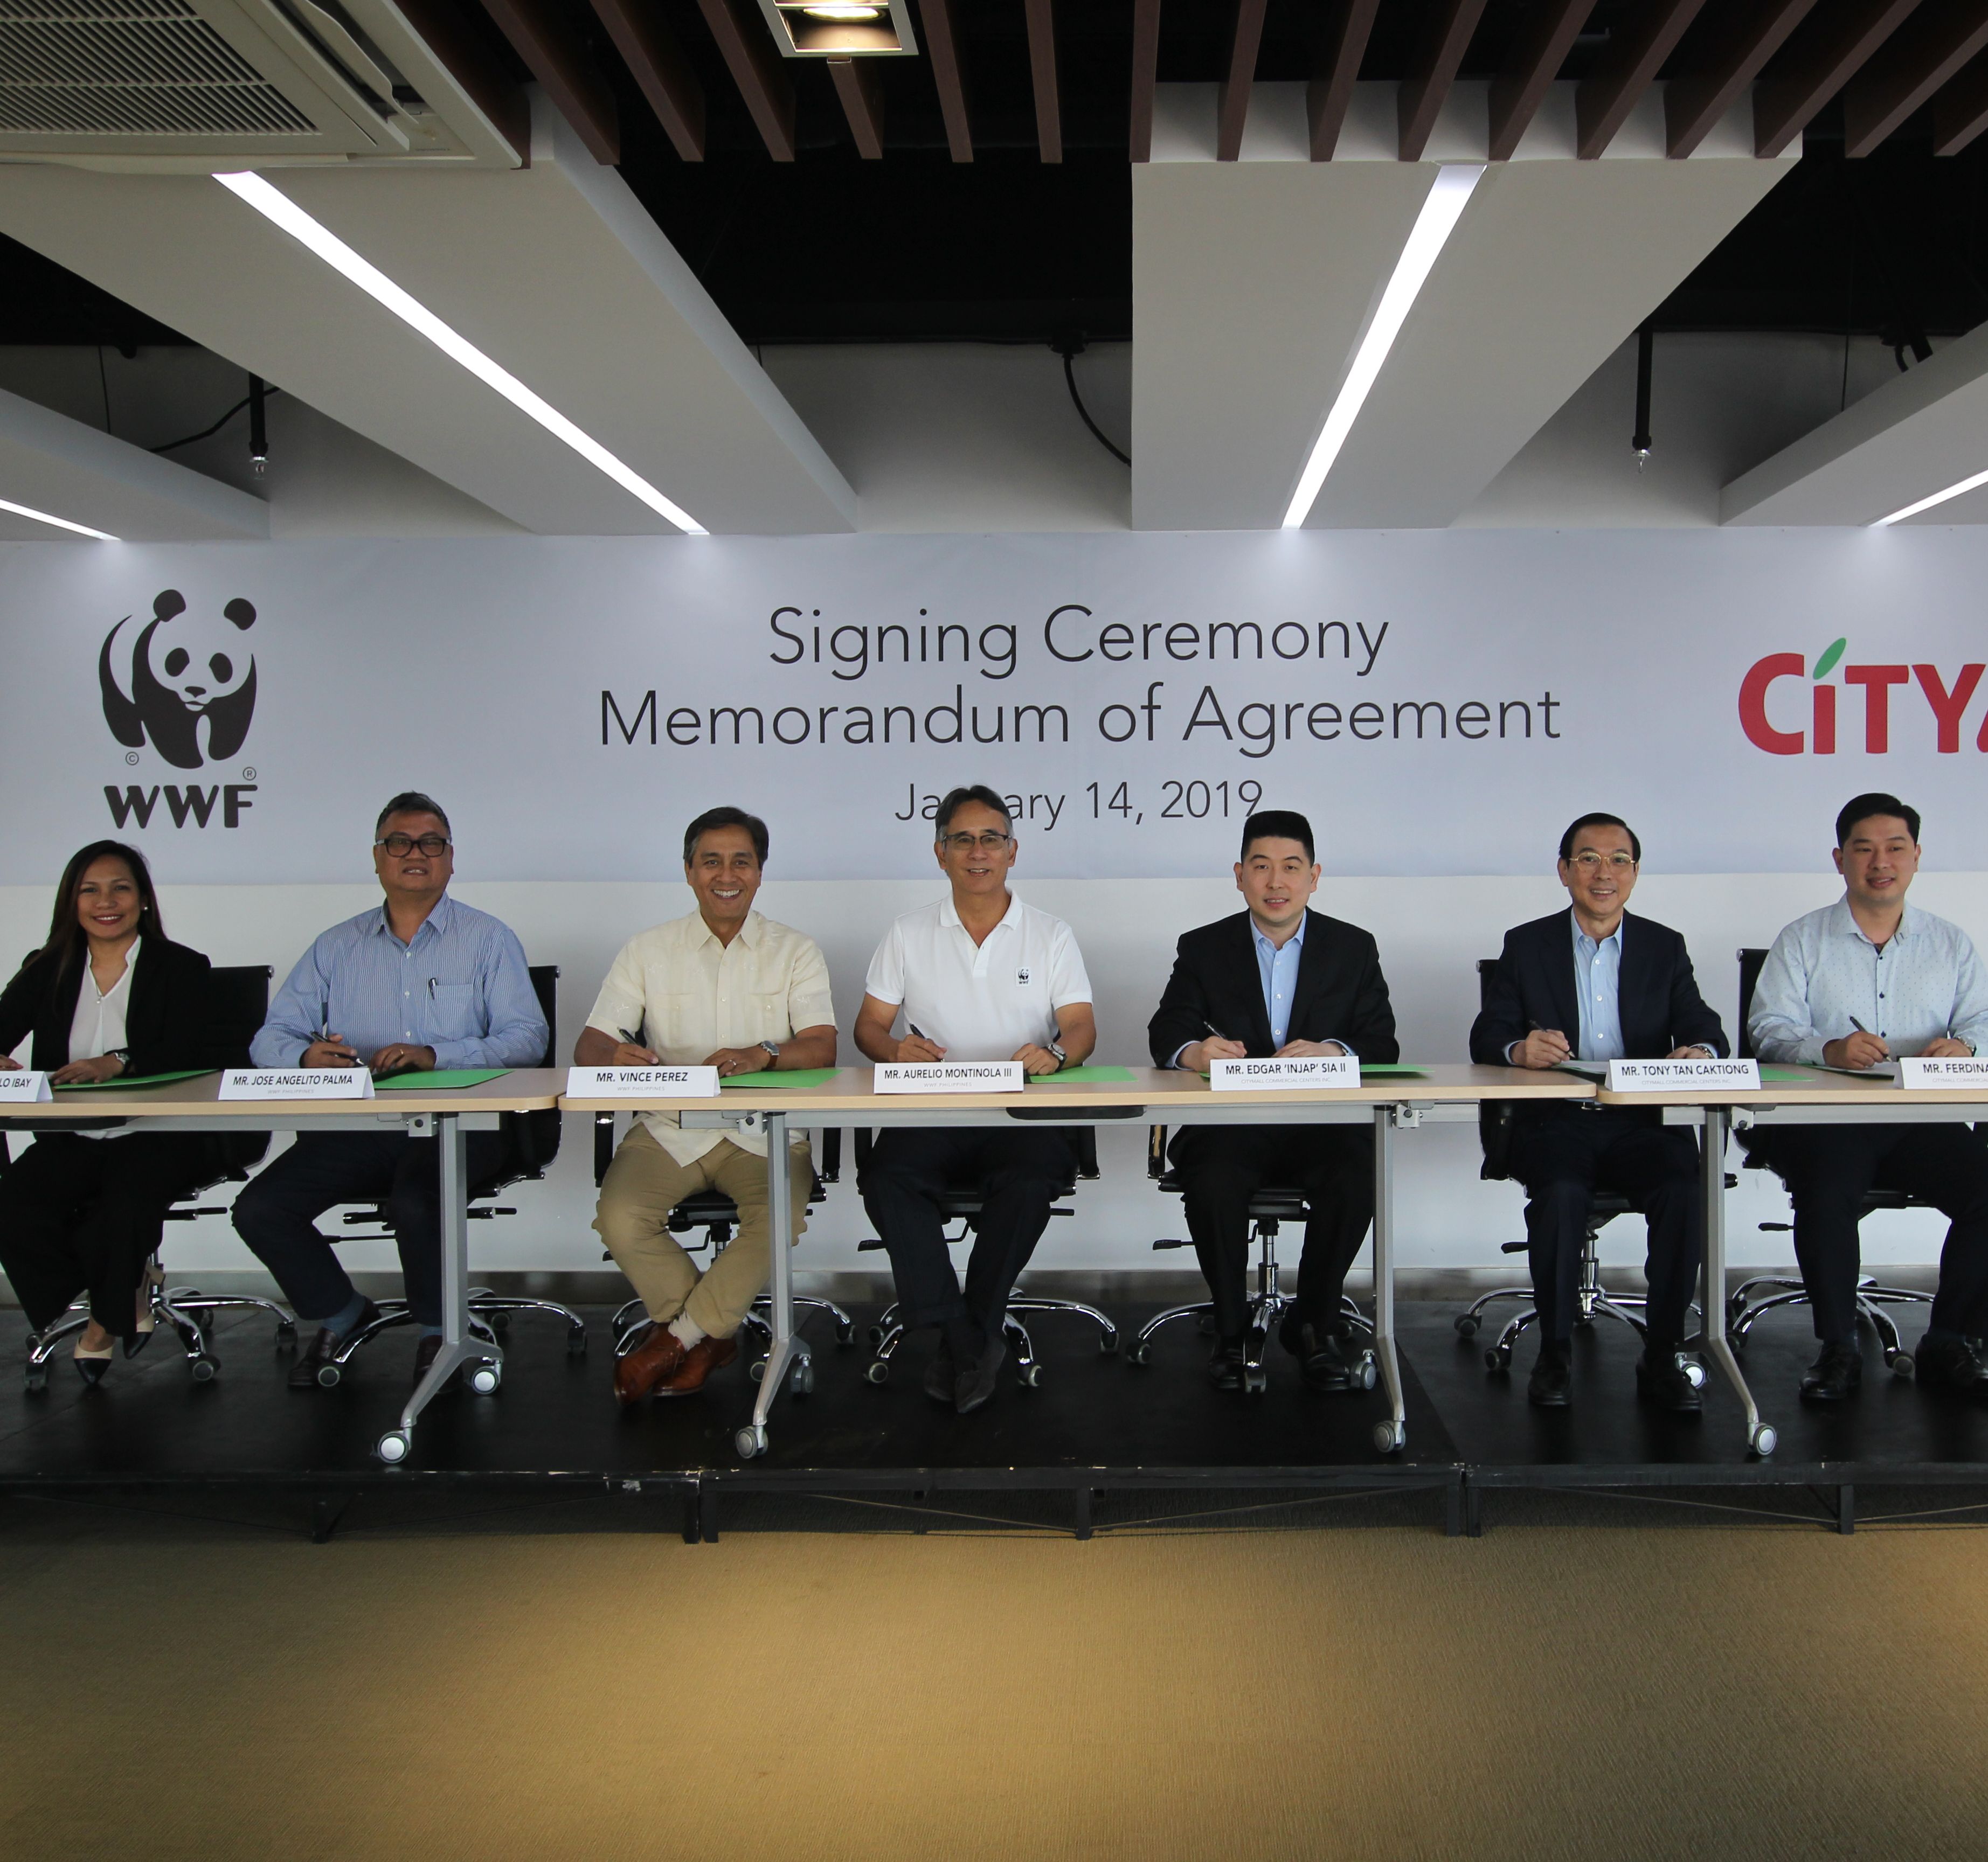 <h1>CityMall Partners with WWF-Philippines</h1>
<p>The drive toward a sustainable Philippines gains steam as partners</p>
<p style="text-align: right;"><a href="https://support.wwf.org.ph/resource-center/story-archives-2017/citymall-wwf-partnership/" target="_blank">Read More &gt;</a></p>